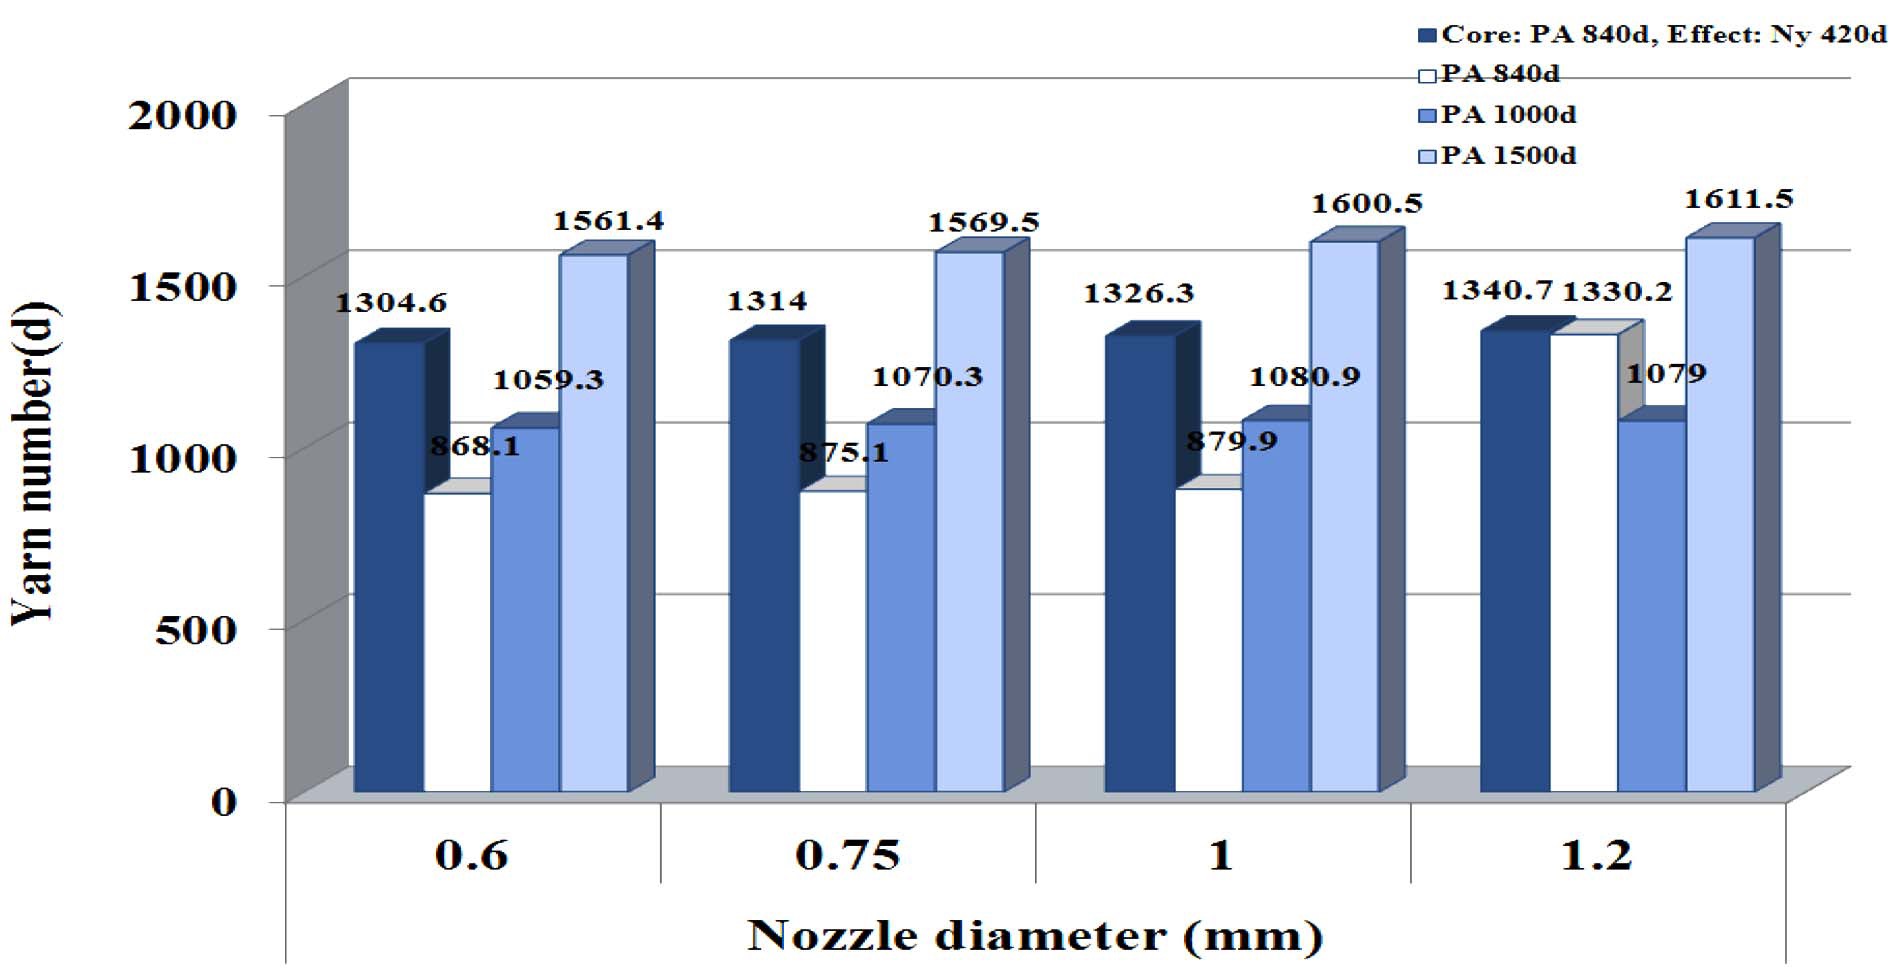 Yarn linear density of specimens according to the ATY nozzle diameter.